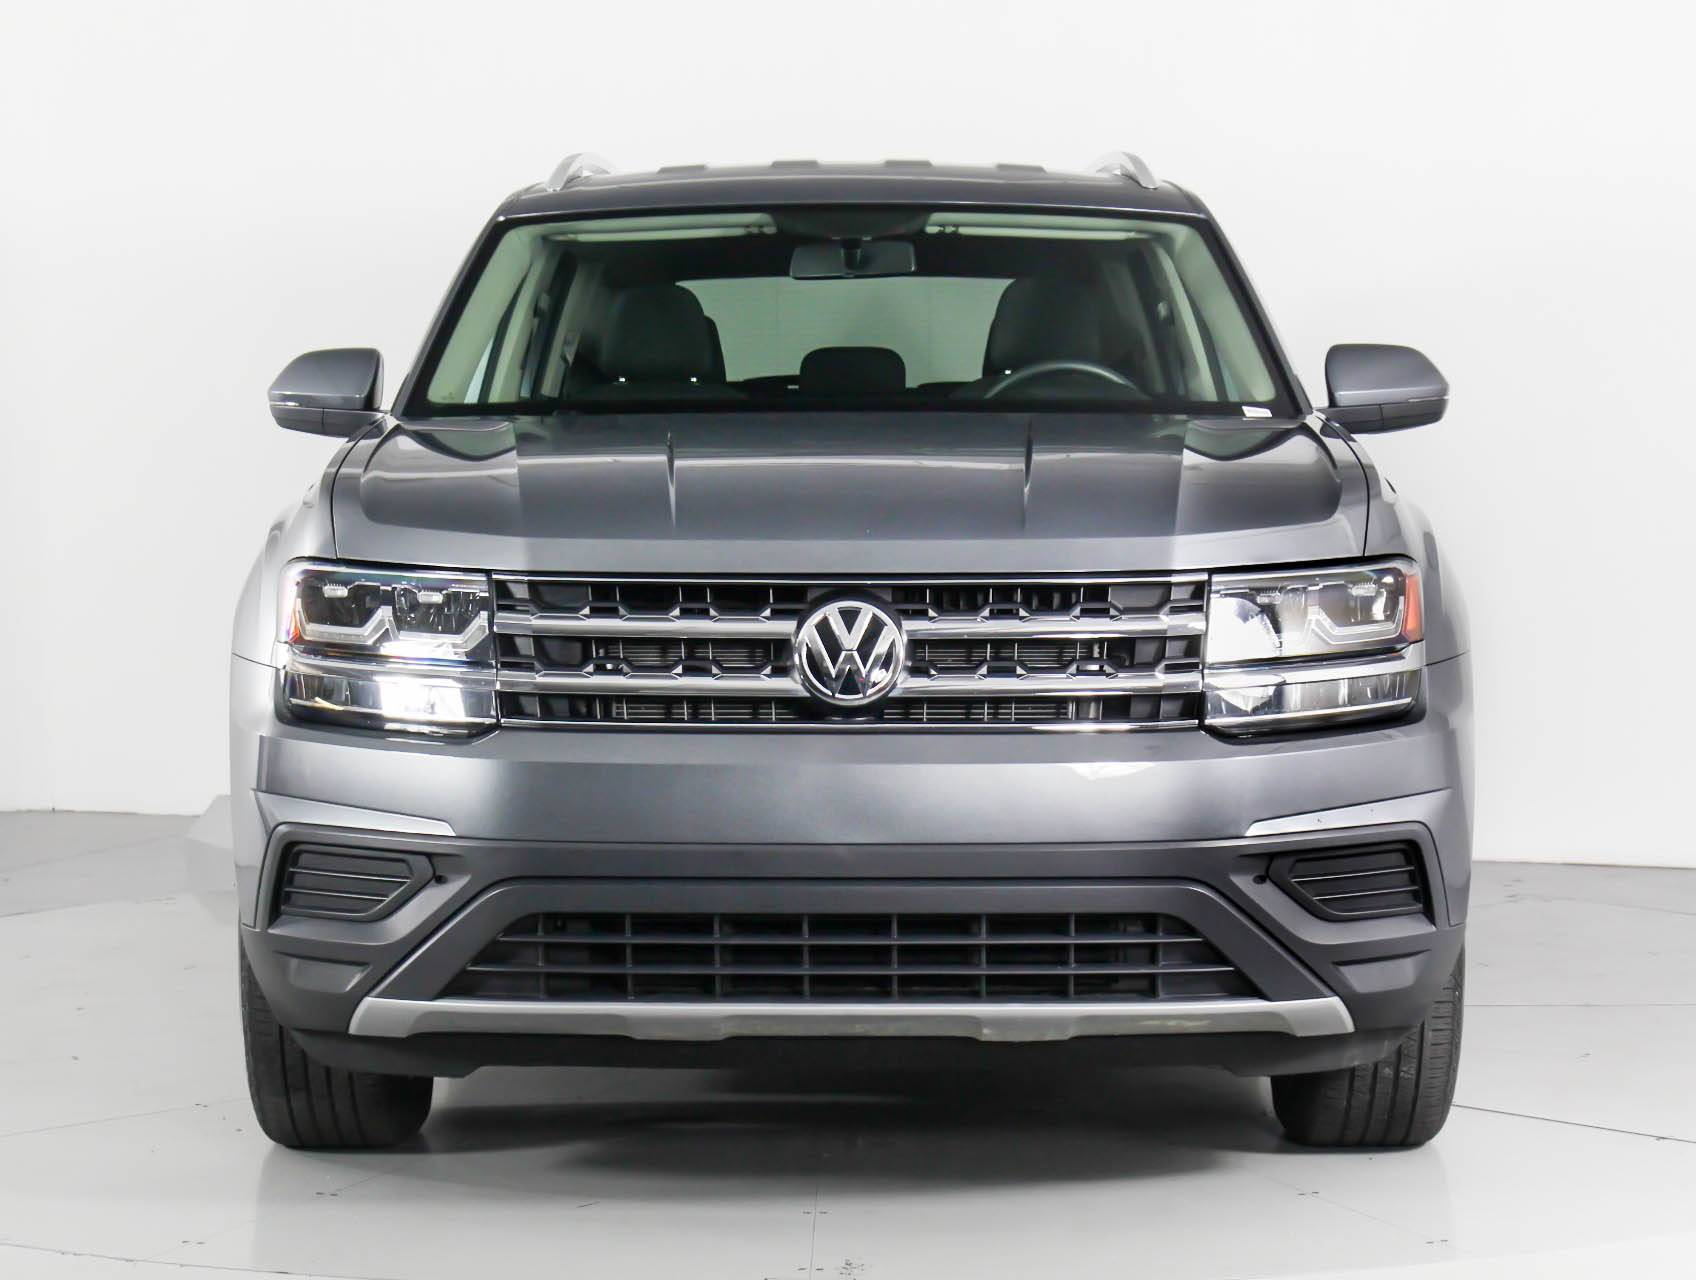 Florida Fine Cars - Used VOLKSWAGEN ATLAS 2018 WEST PALM S